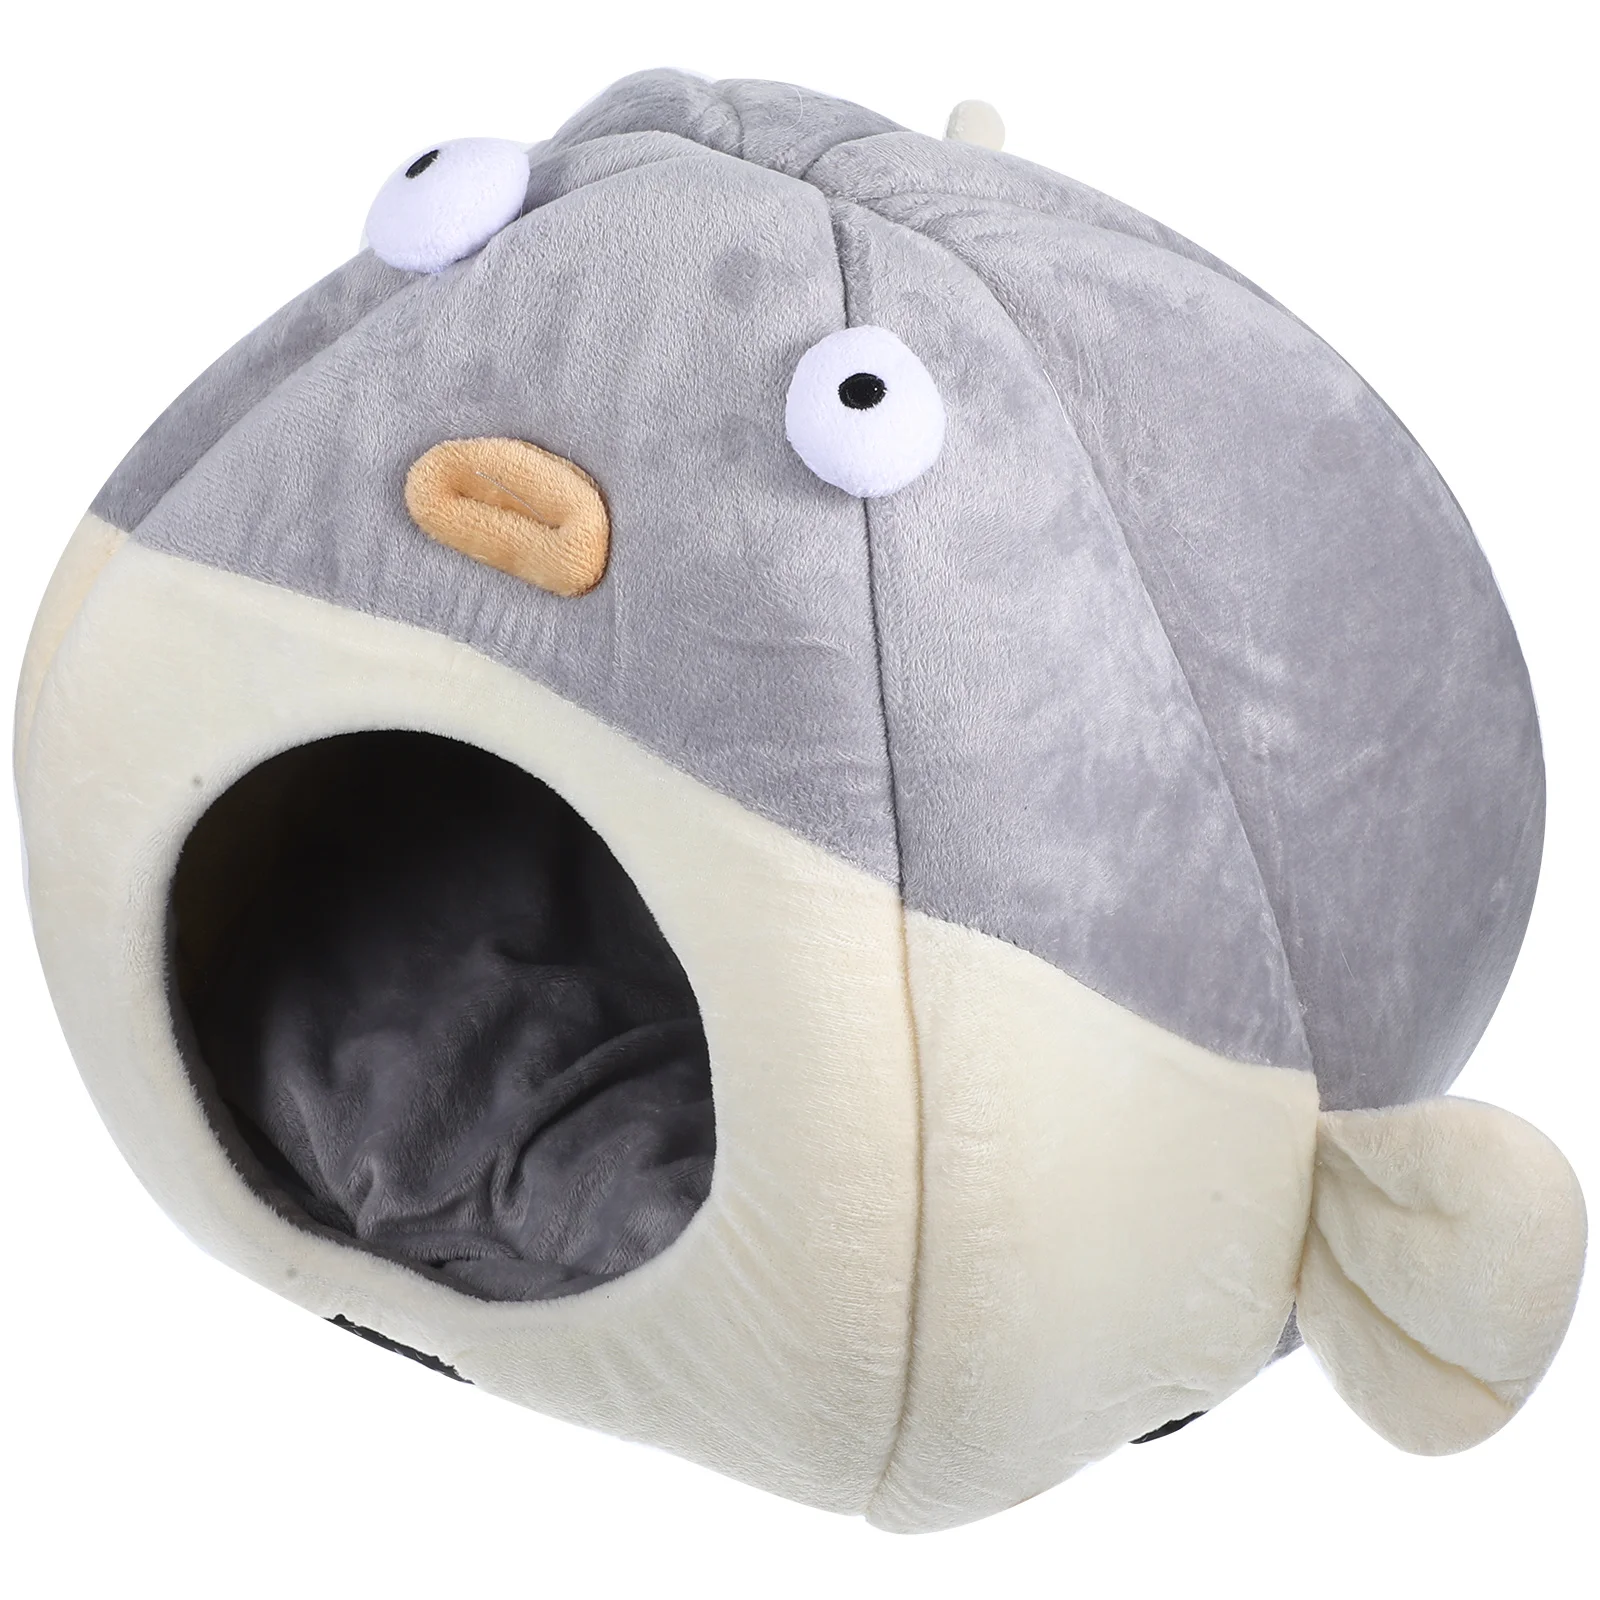 

Cat House Indoor Pet Litter Sleeping Bed Warm Nest Semi-Enclosed Comfortable Cave Cushion